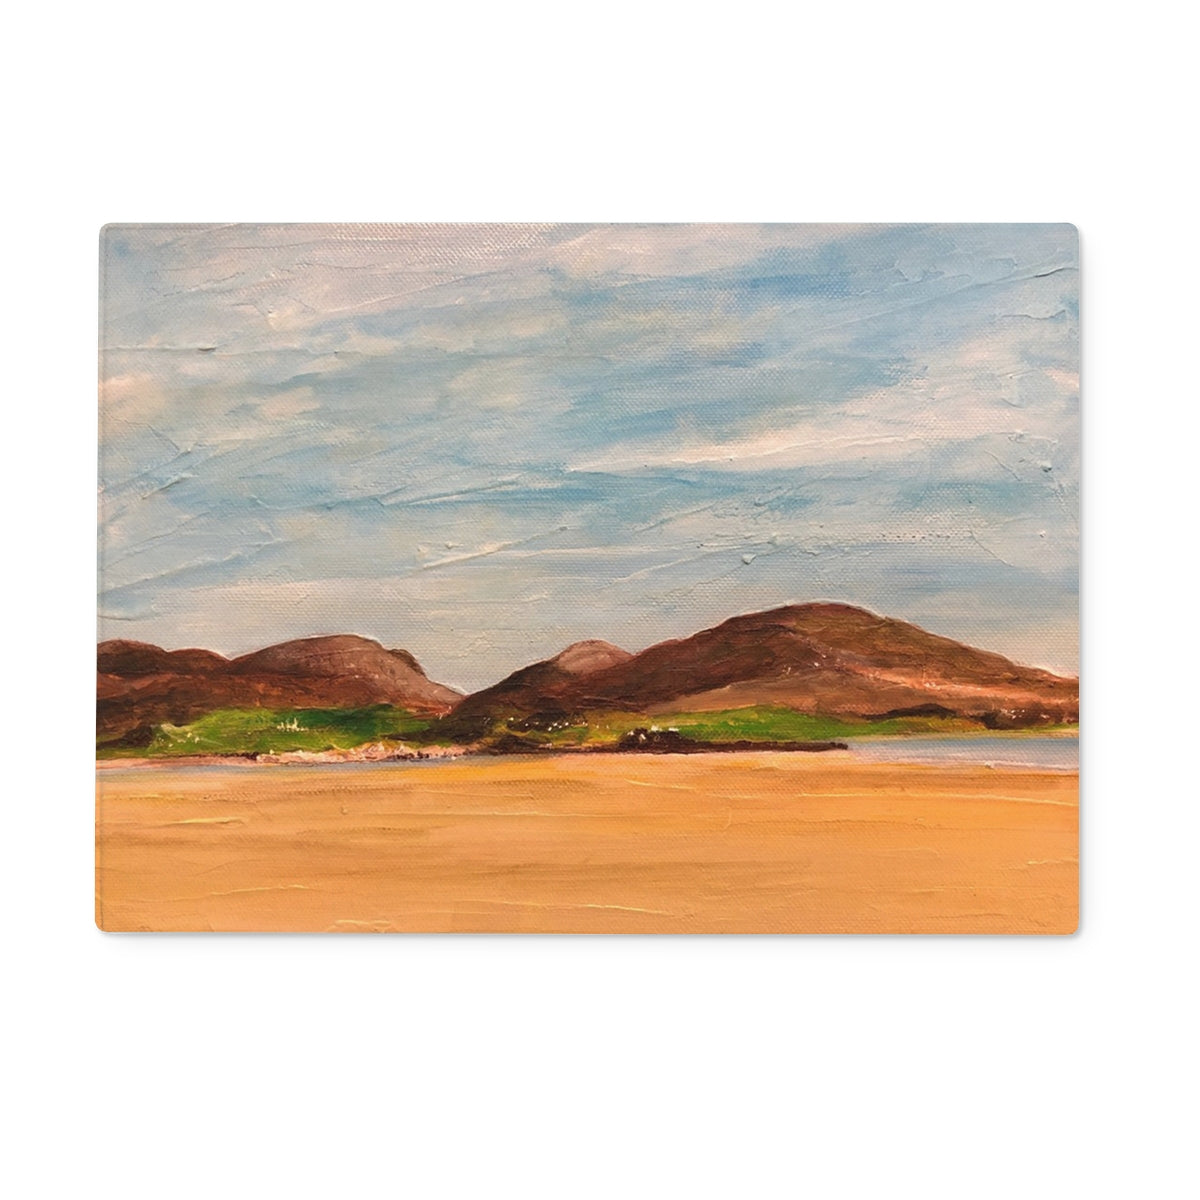 Uig Sands Lewis Art Gifts Glass Chopping Board-Glass Chopping Boards-Hebridean Islands Art Gallery-15"x11" Rectangular-Paintings, Prints, Homeware, Art Gifts From Scotland By Scottish Artist Kevin Hunter